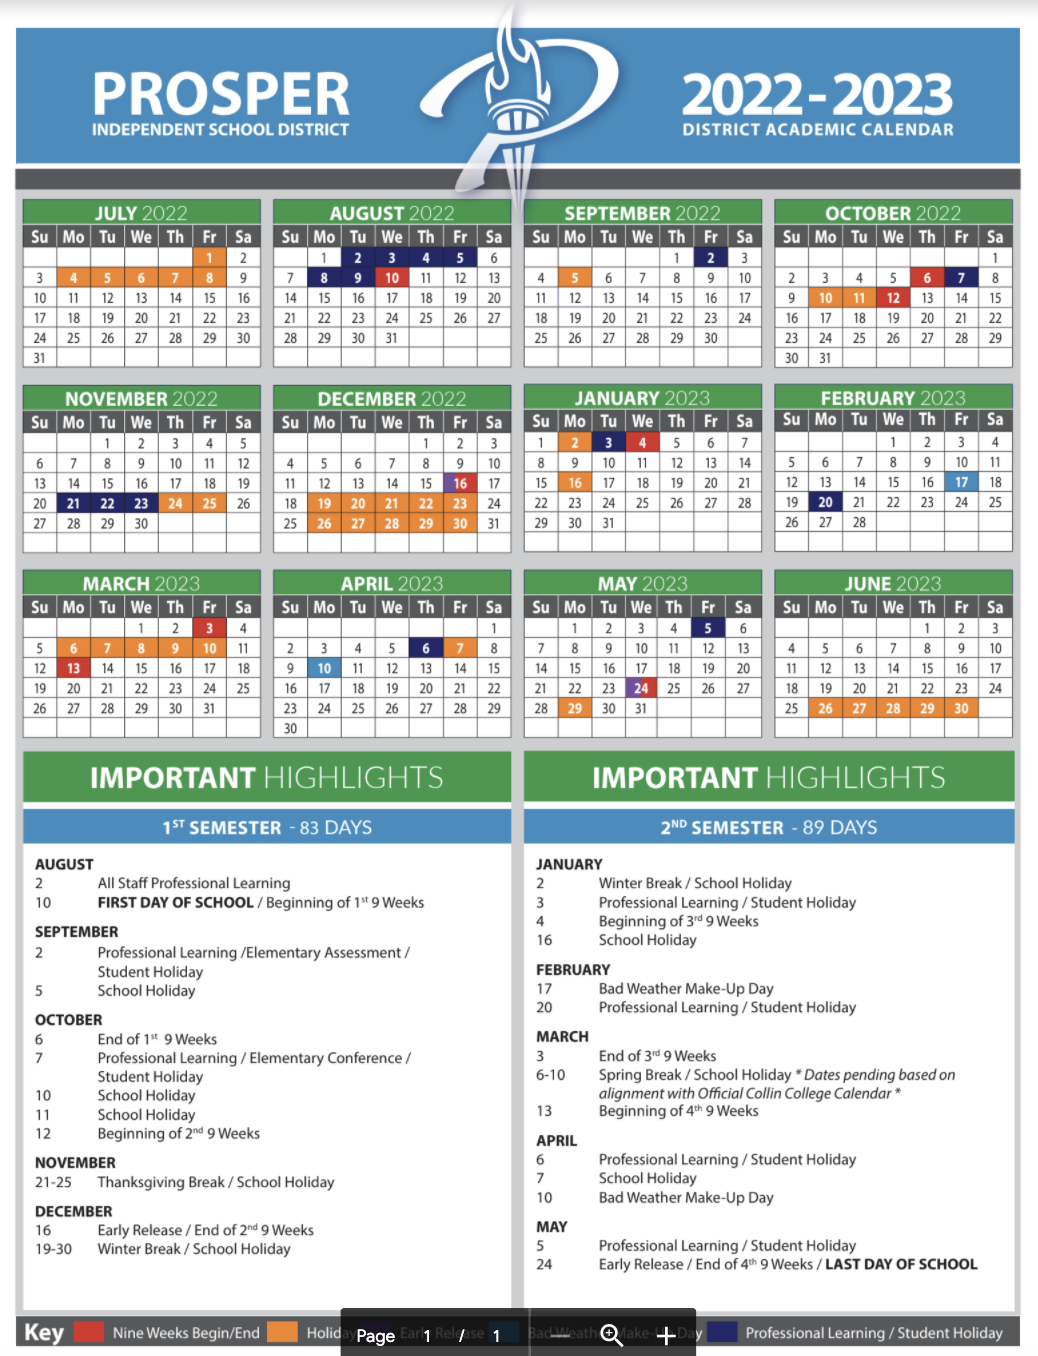 Dallas Isd Calendar 2022 23 Here Are Prosper Isd's School Calendars For The 2022-2023 And The 2023-2024  School Years | Cities | Checkoutdfw.com